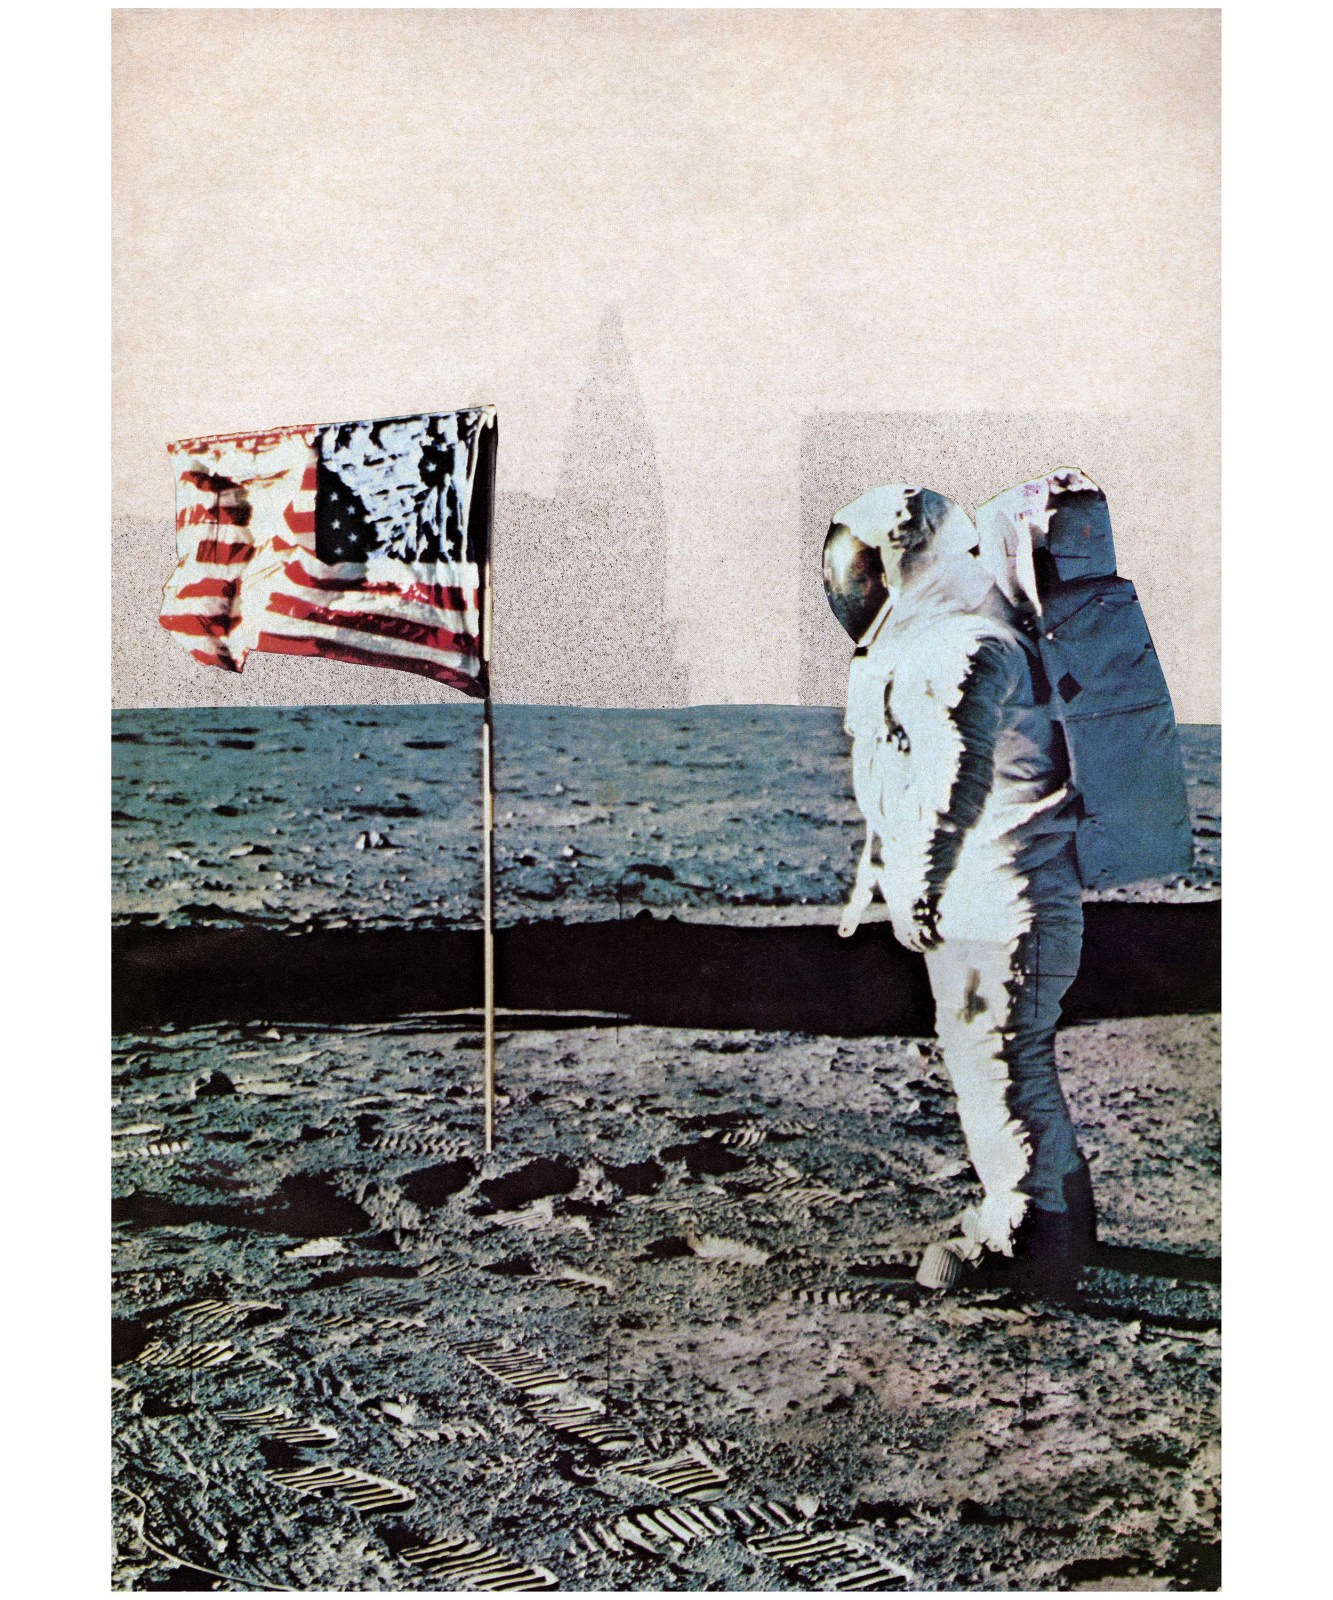 MARTHA ROSLER To the Moon, from the series House Beautiful: The Colonies c. 1969-72